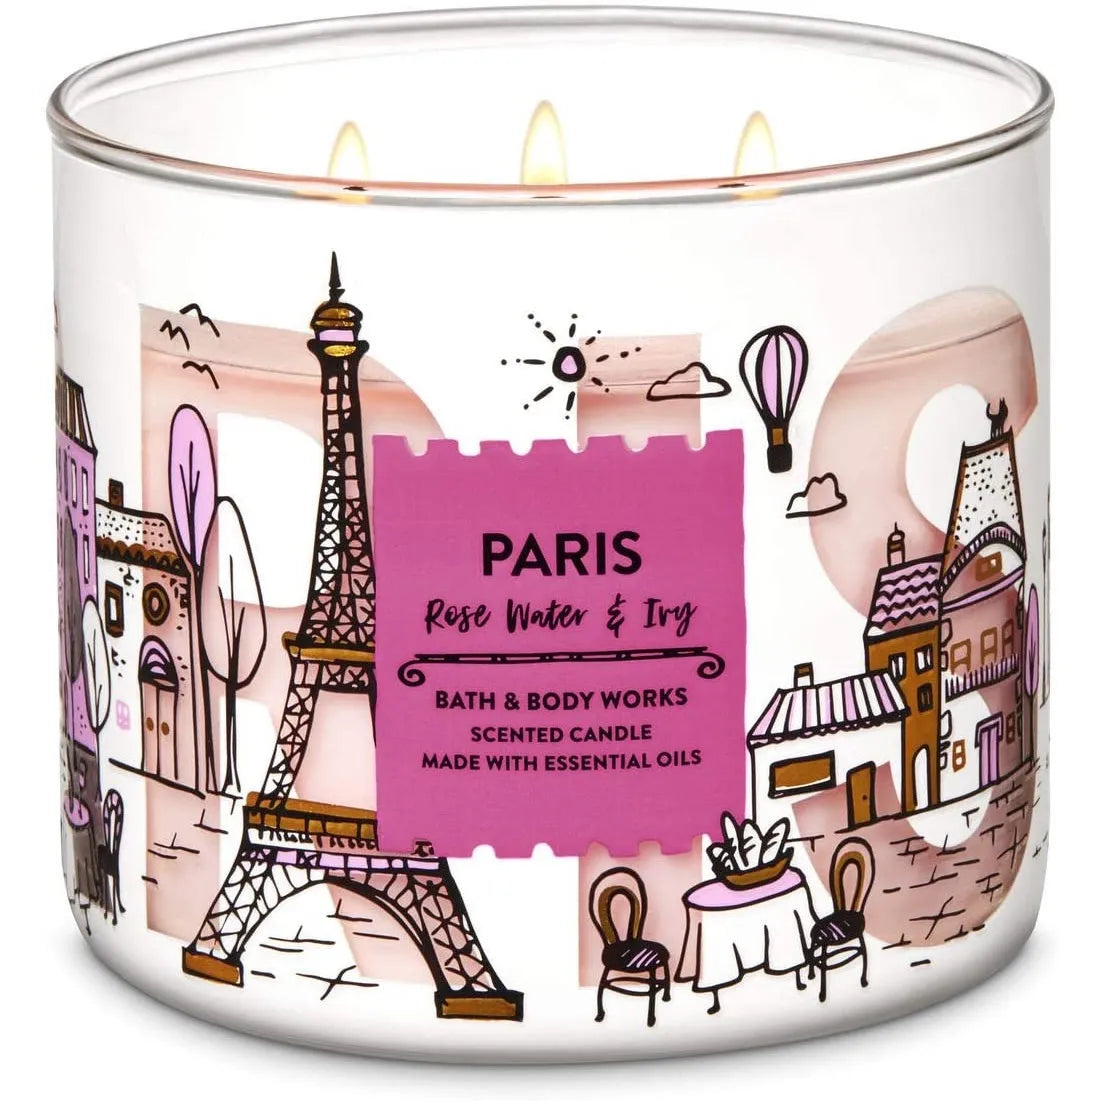 Bath & Body Works Candle - Paris Rose Water & Ivy